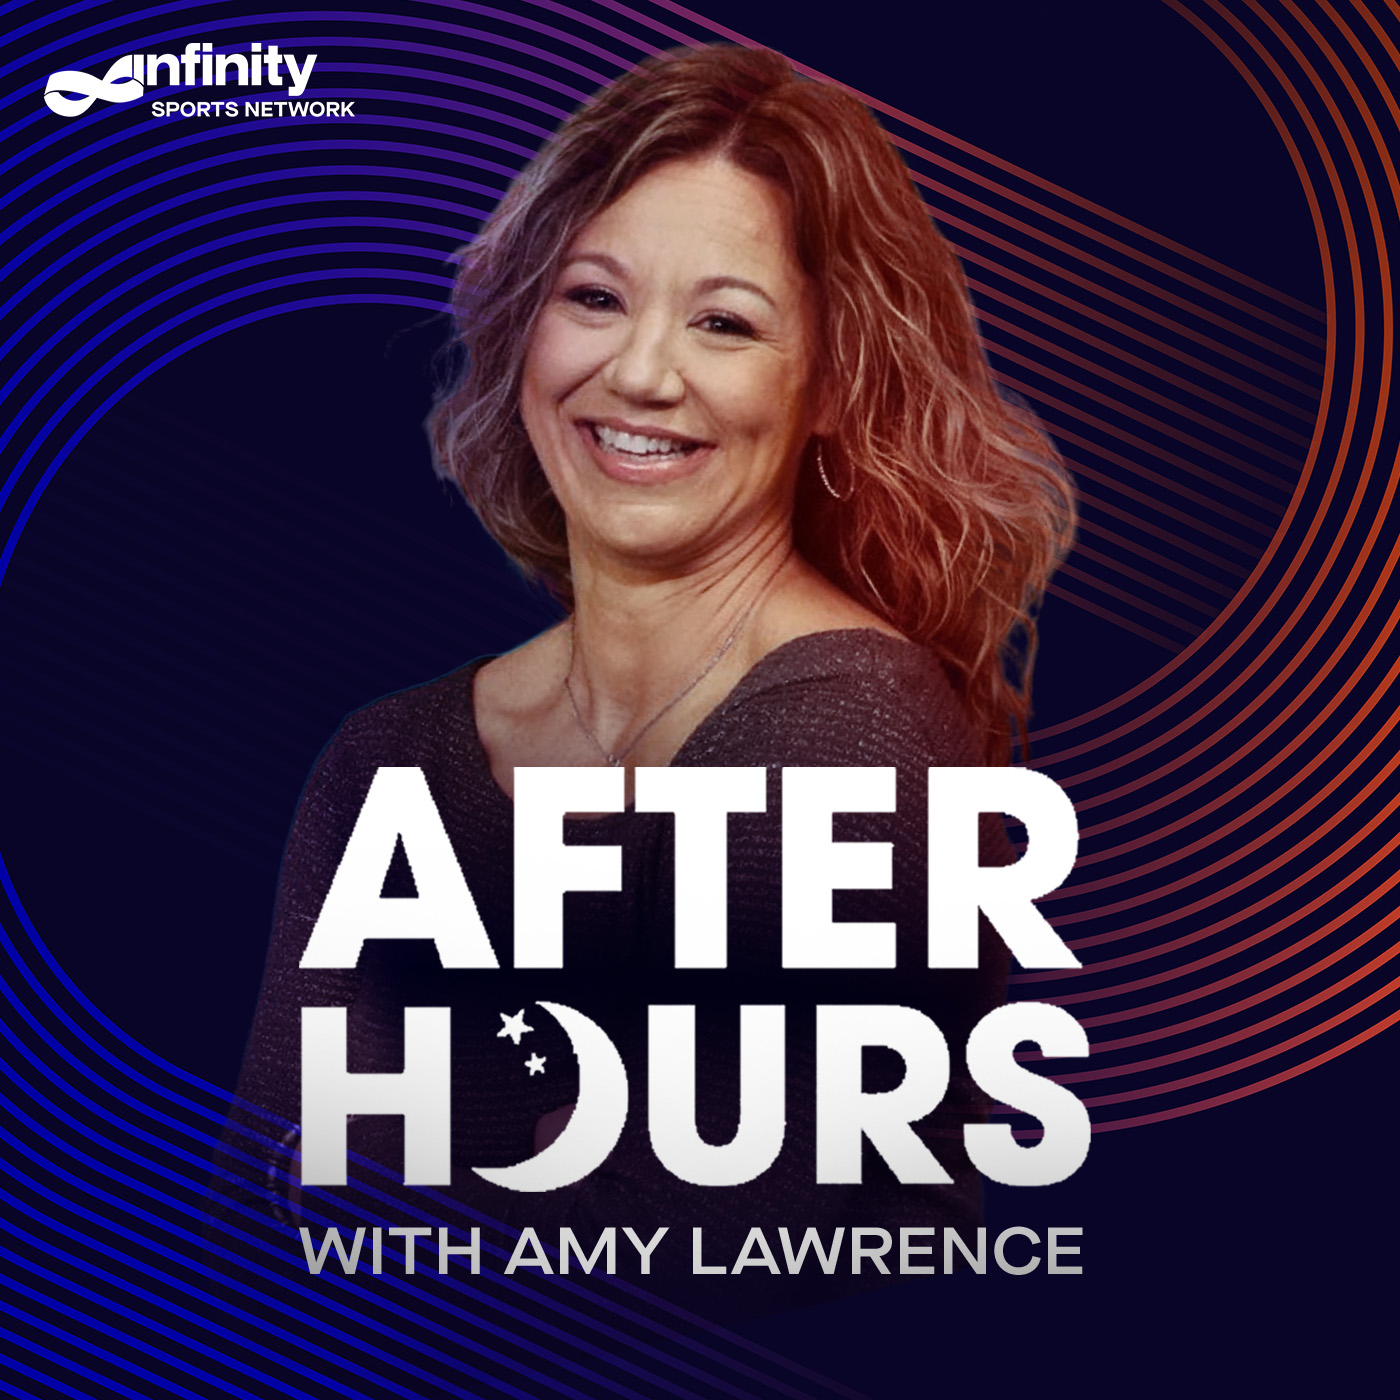 6/25/21 After Hours with Amy Lawrence PODCAST: Hour 1